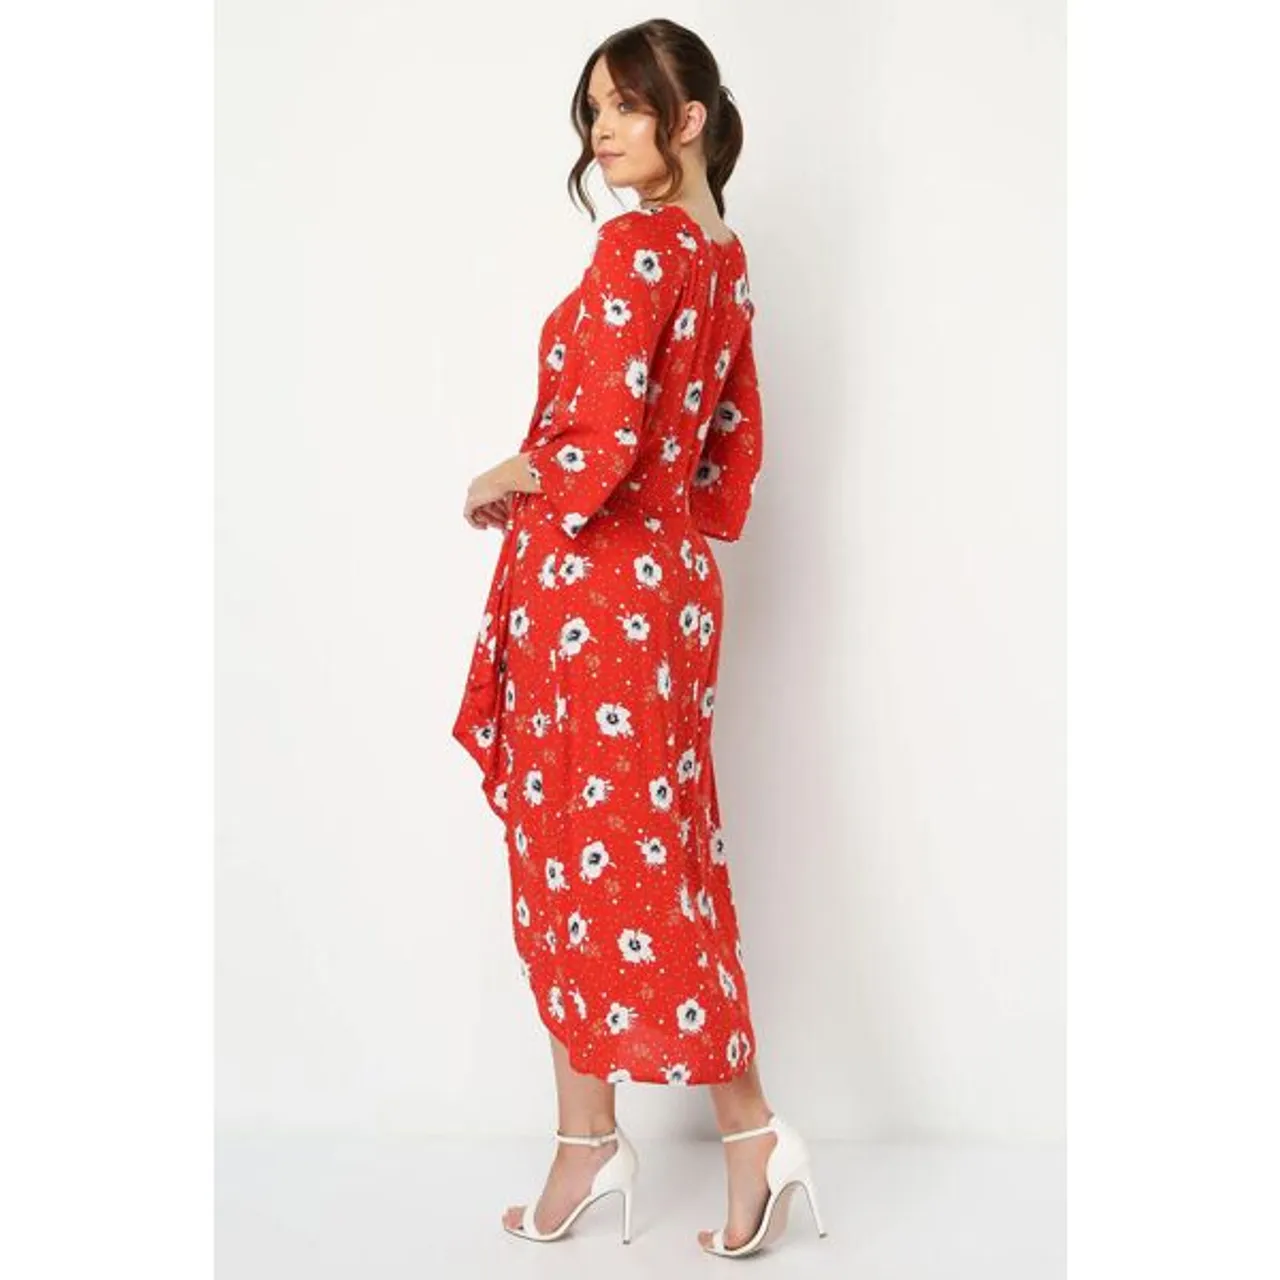 Roman Floral Knot Waist Maxi Dress in Red - Size 10 10 female